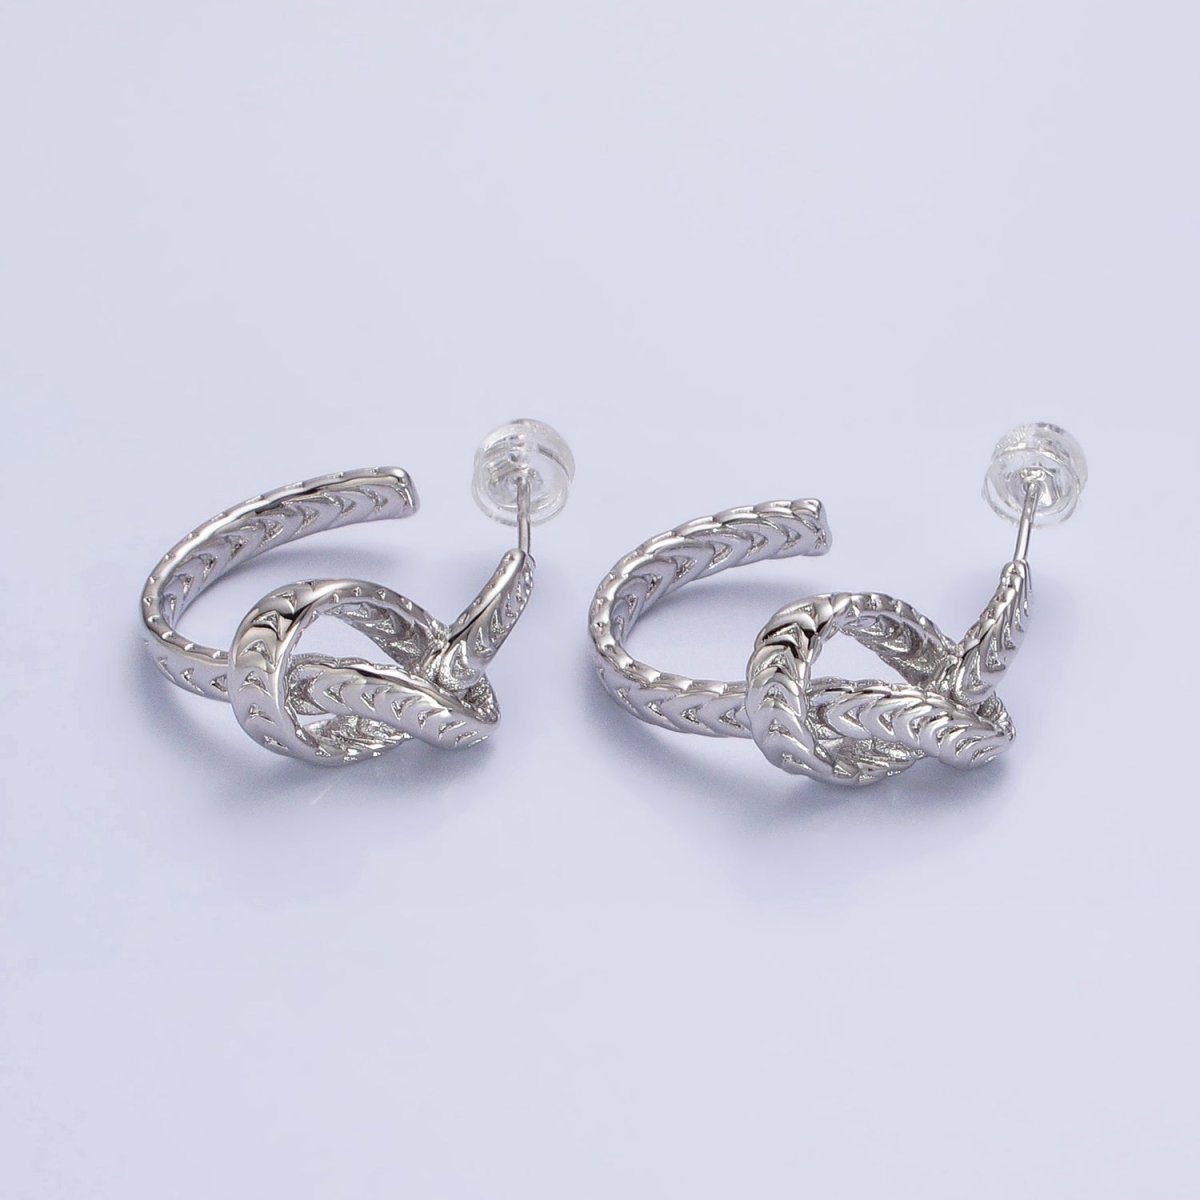 Silver Knot Hoop Earrings • Gold Tie The Knot Hoops • Love Knot Hoops AB604 AB605 - DLUXCA